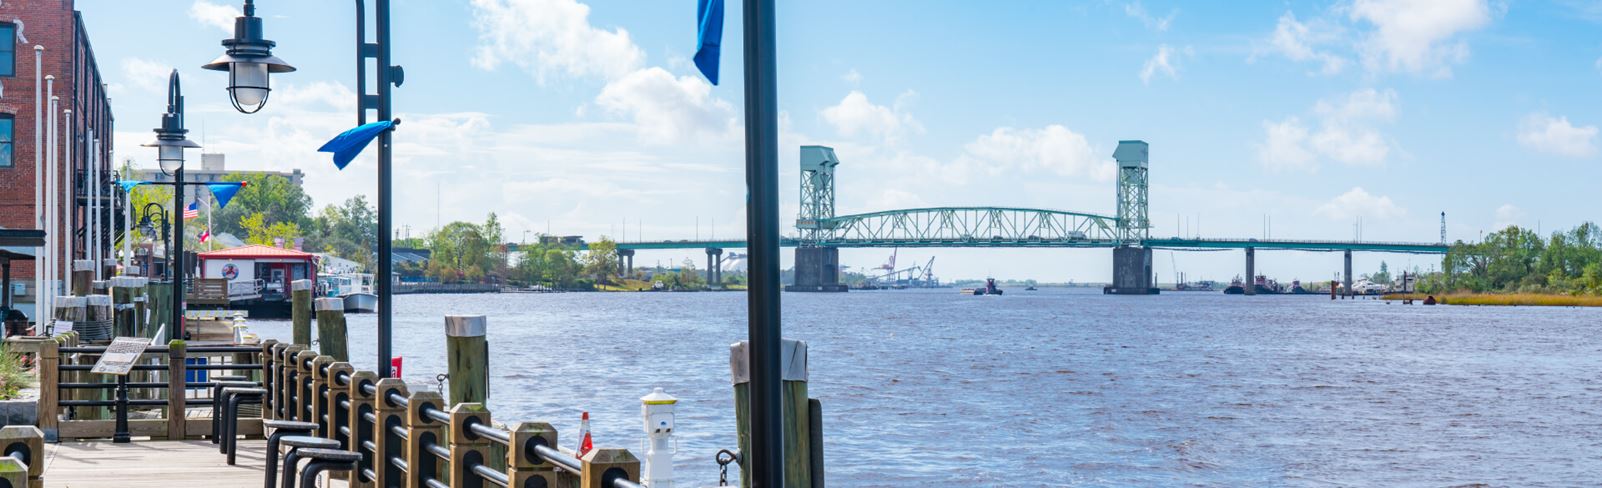 View of the Cape Fear River from riverfront boardwalk in Wilmington, NC.